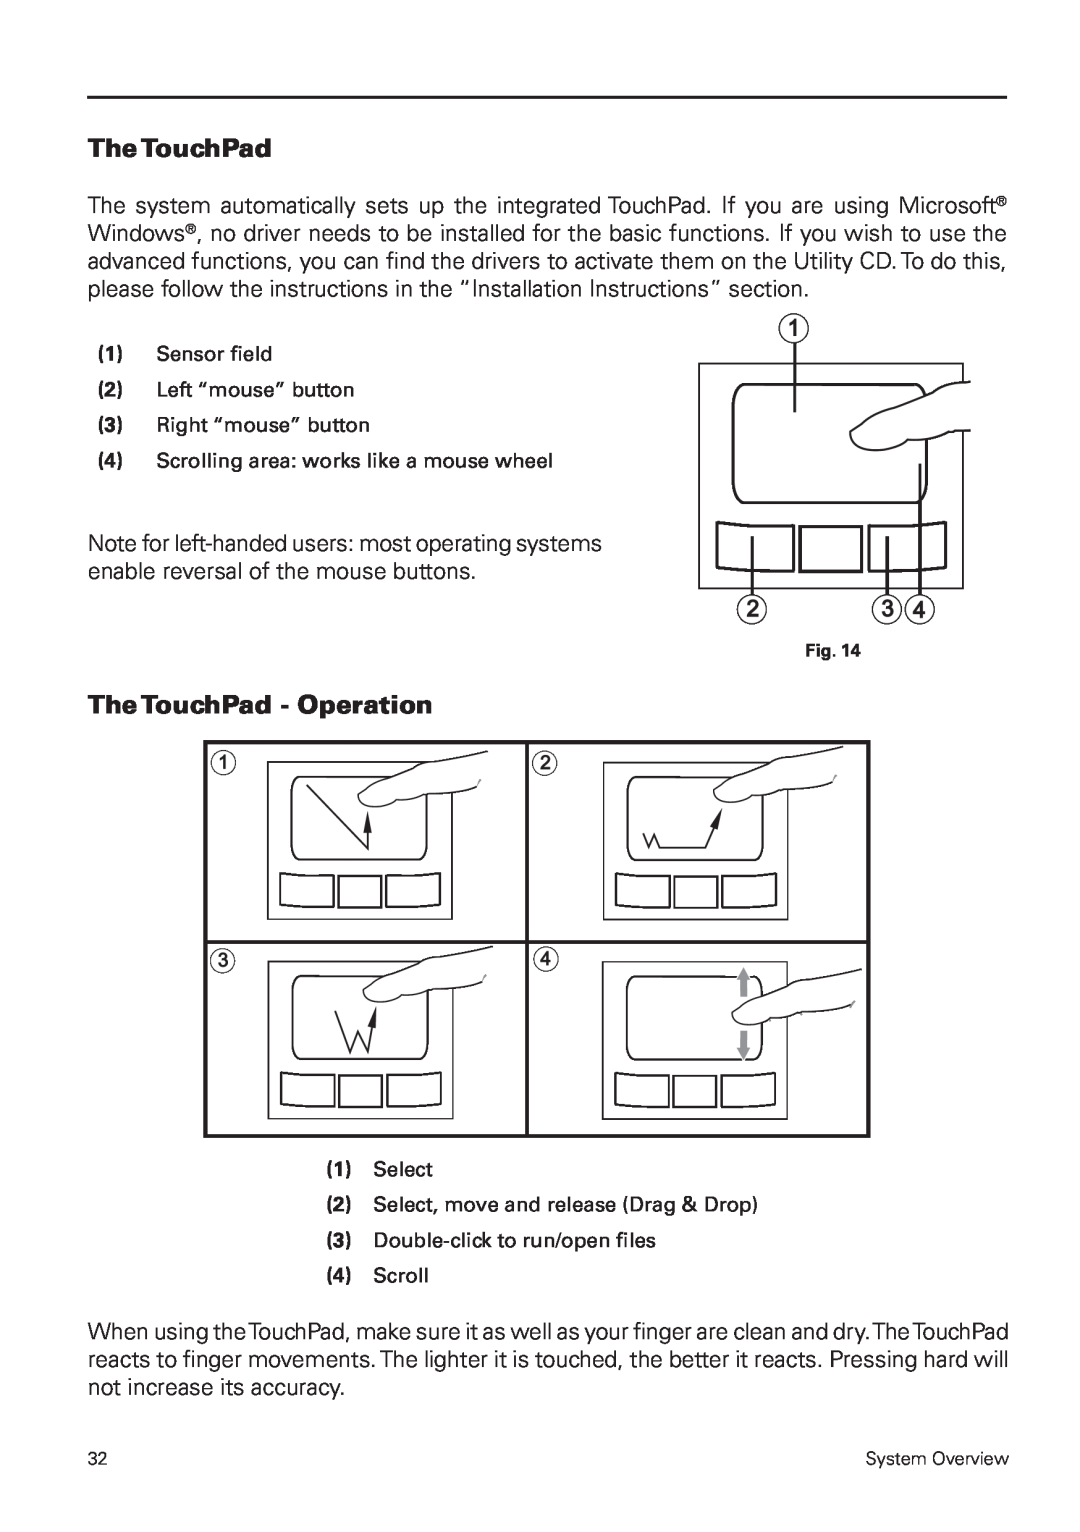 MAXDATA 5500 IR user manual The TouchPad - Operation, Sensor field 2 Left “mouse” button 3 Right “mouse” button 